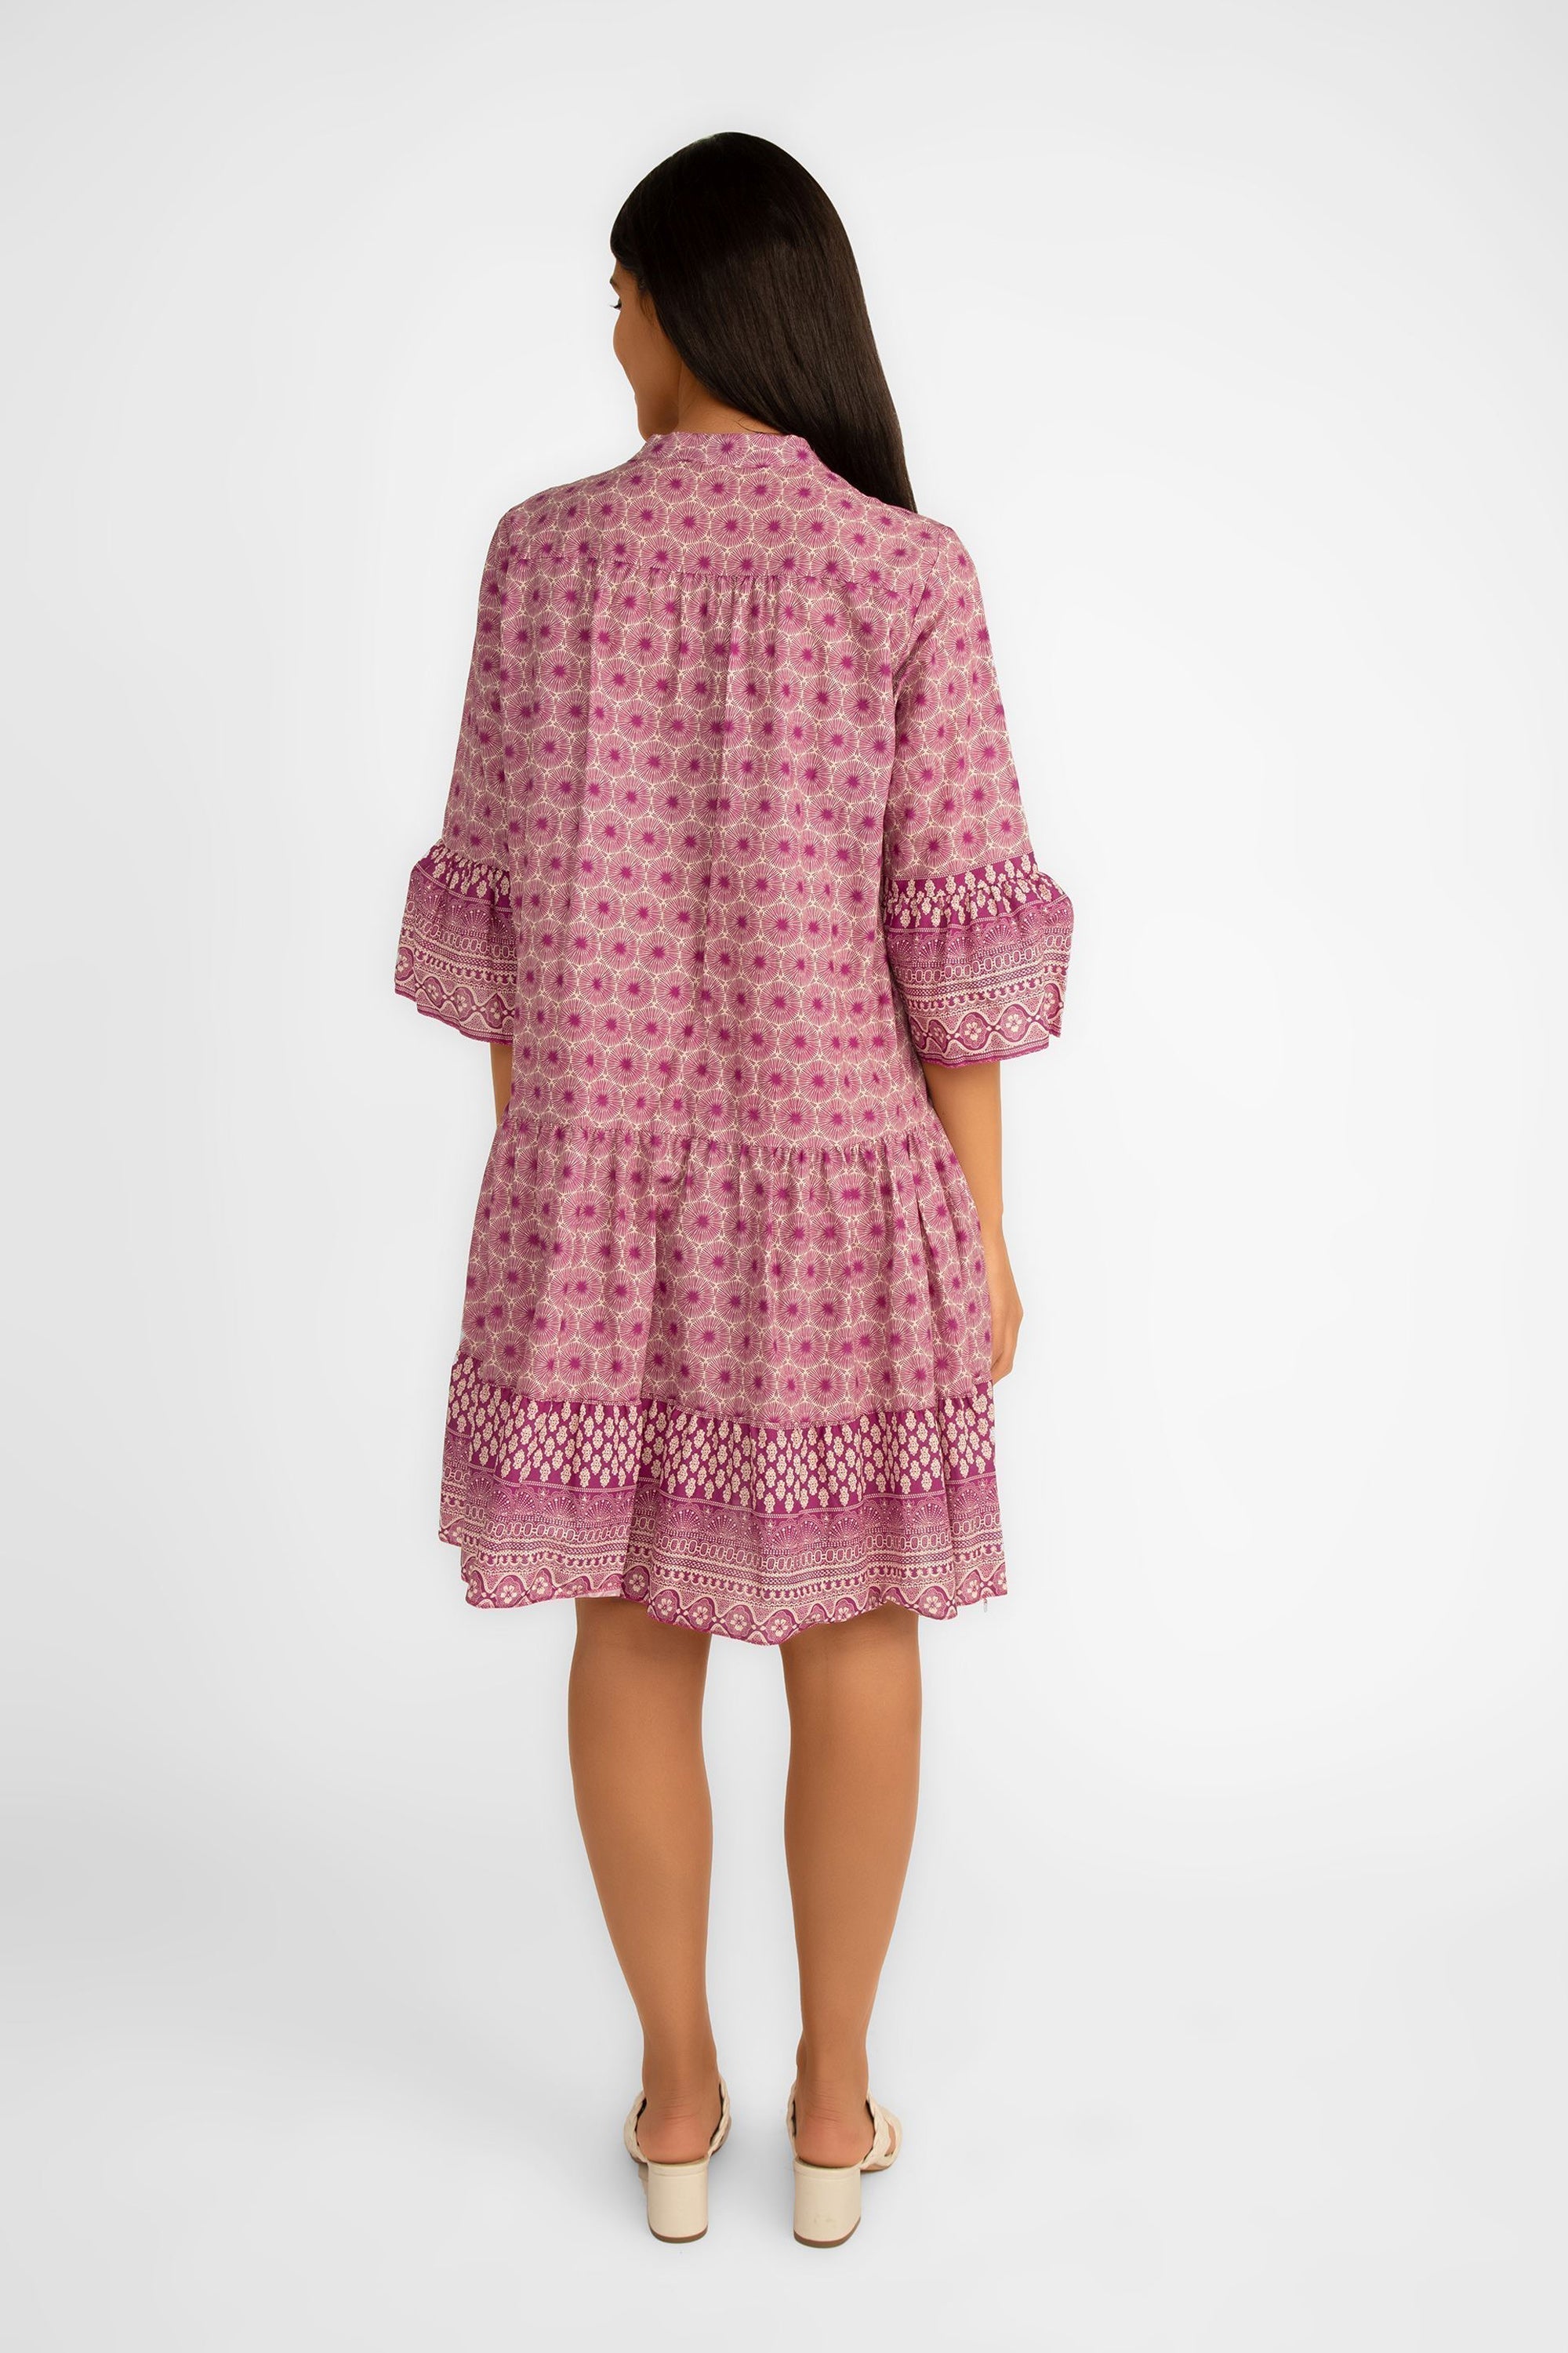 Back view of Julietta (10-H2654-M32) Women's 3/4 Tulip Sleeve Tiered Mini Dress in a Magenta and white geometric print with ornate printed trim